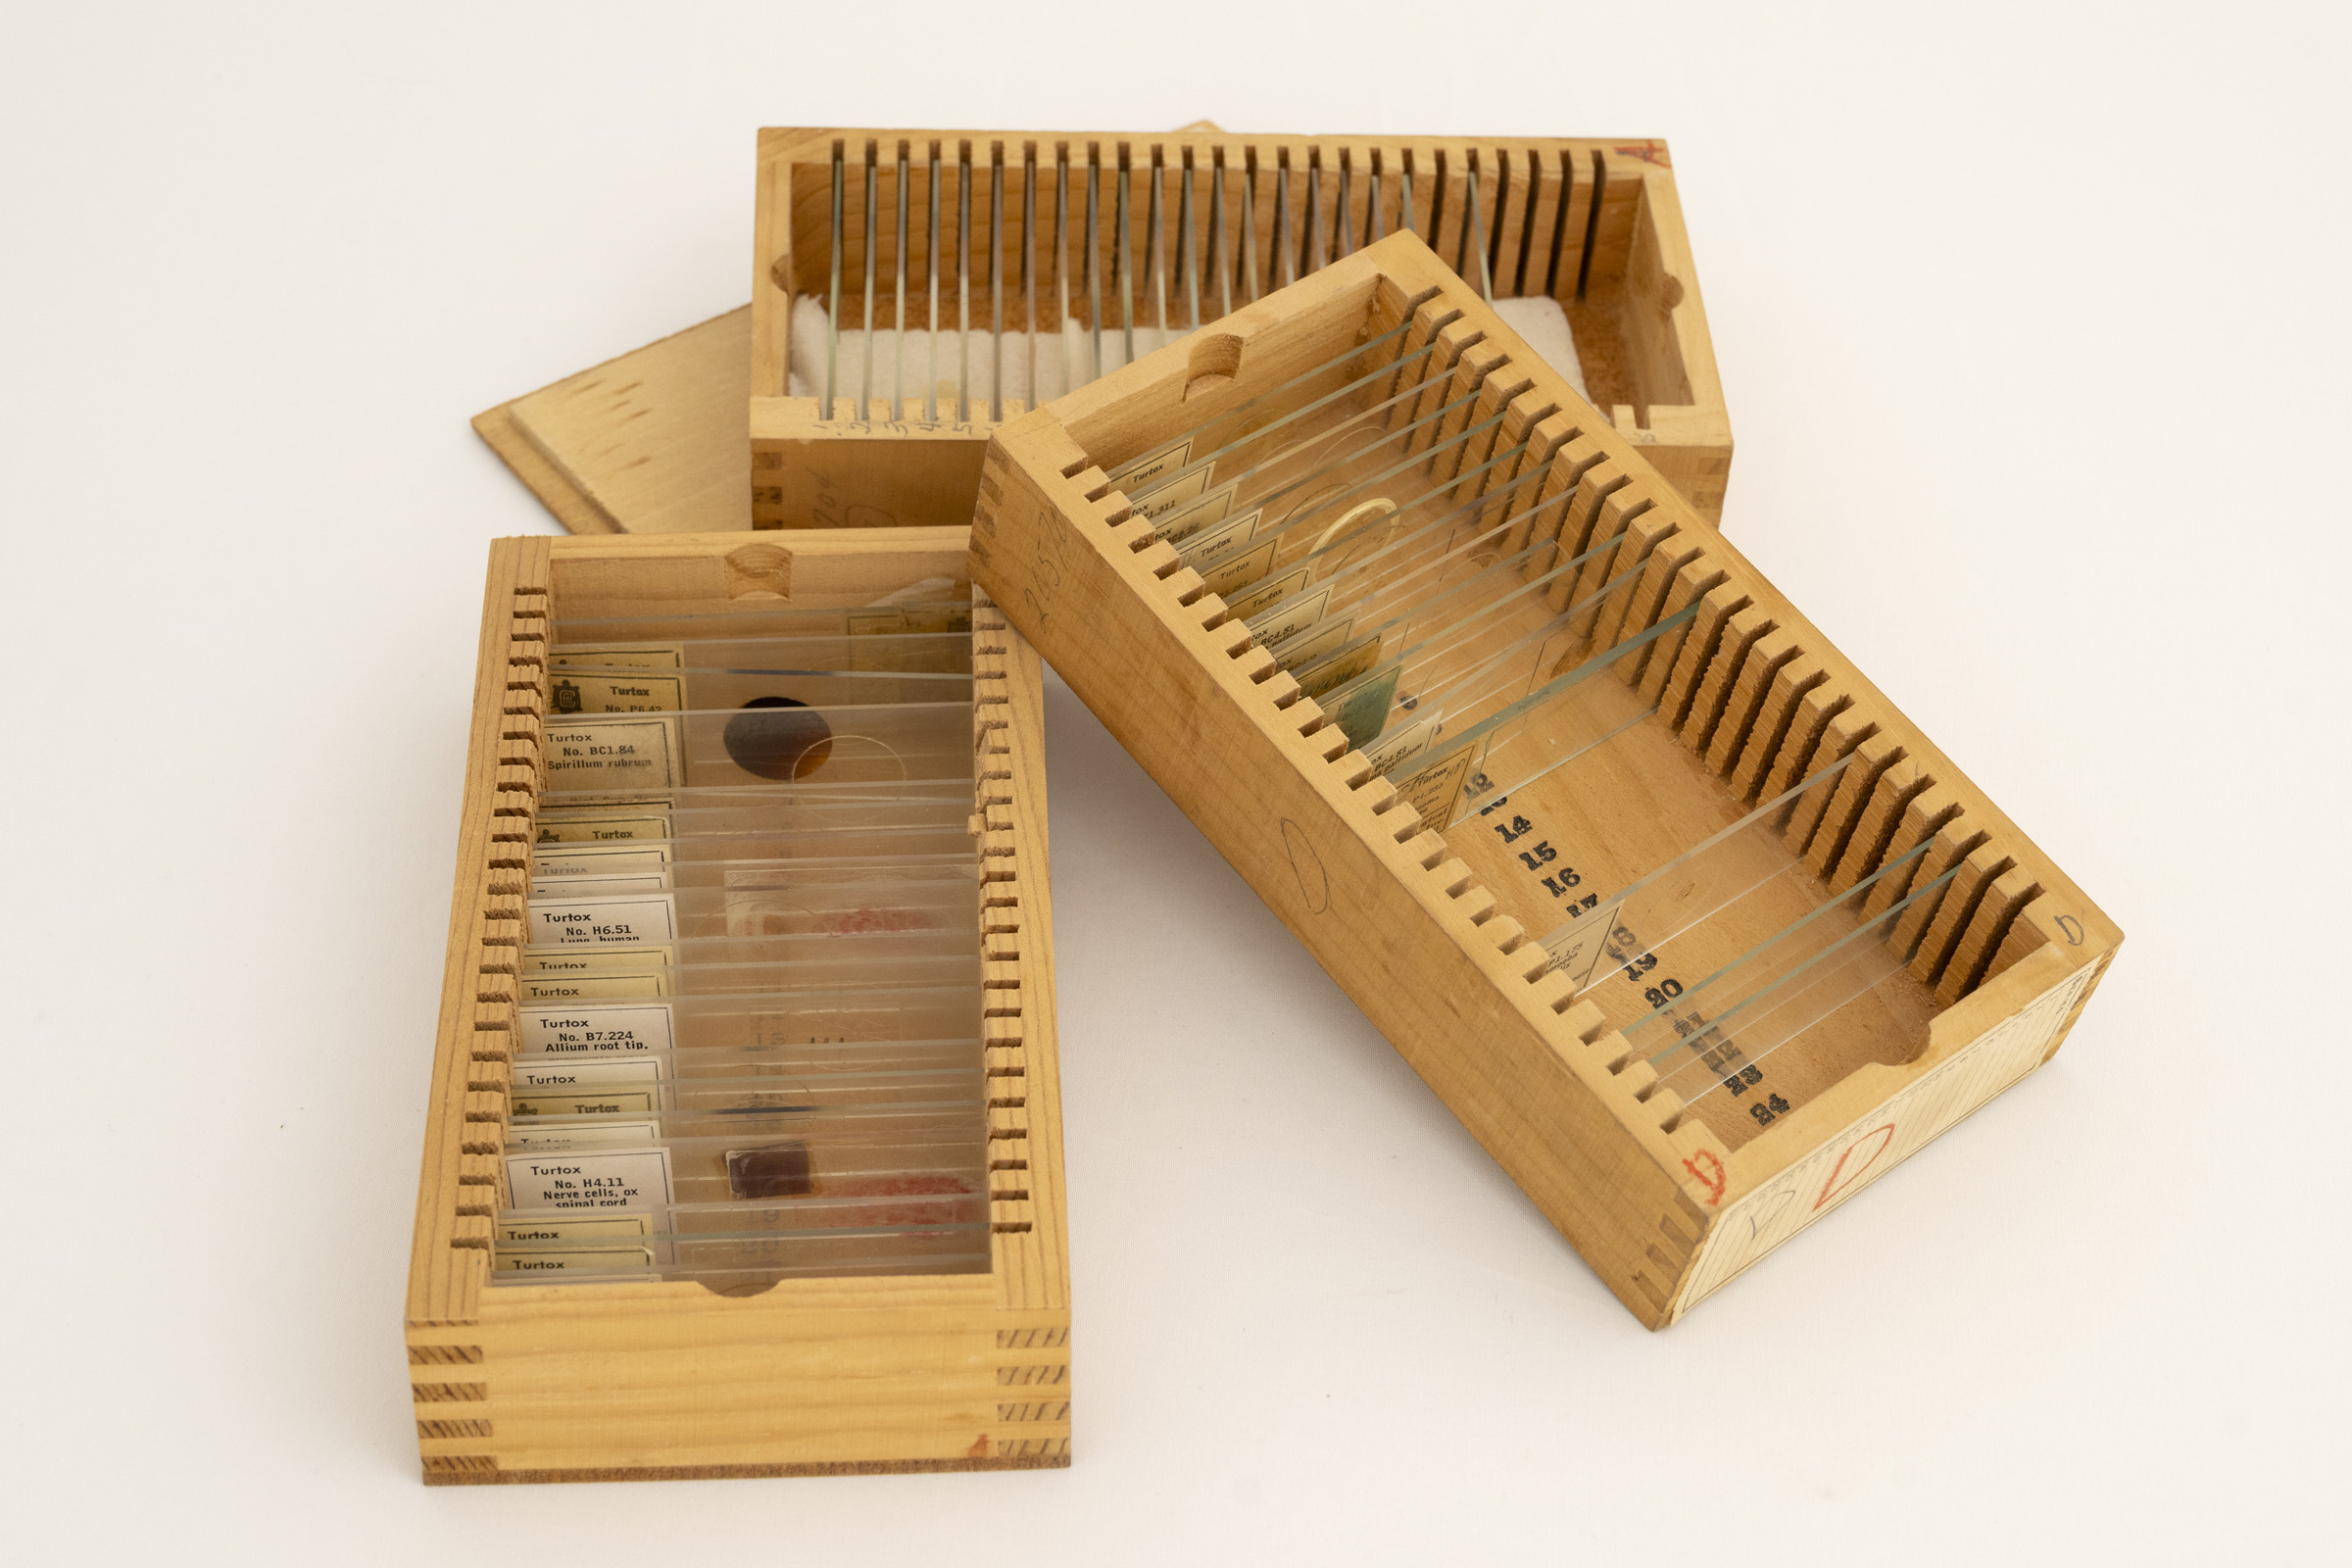 Three wooden slide holder boxes containing slides and one wooden lid